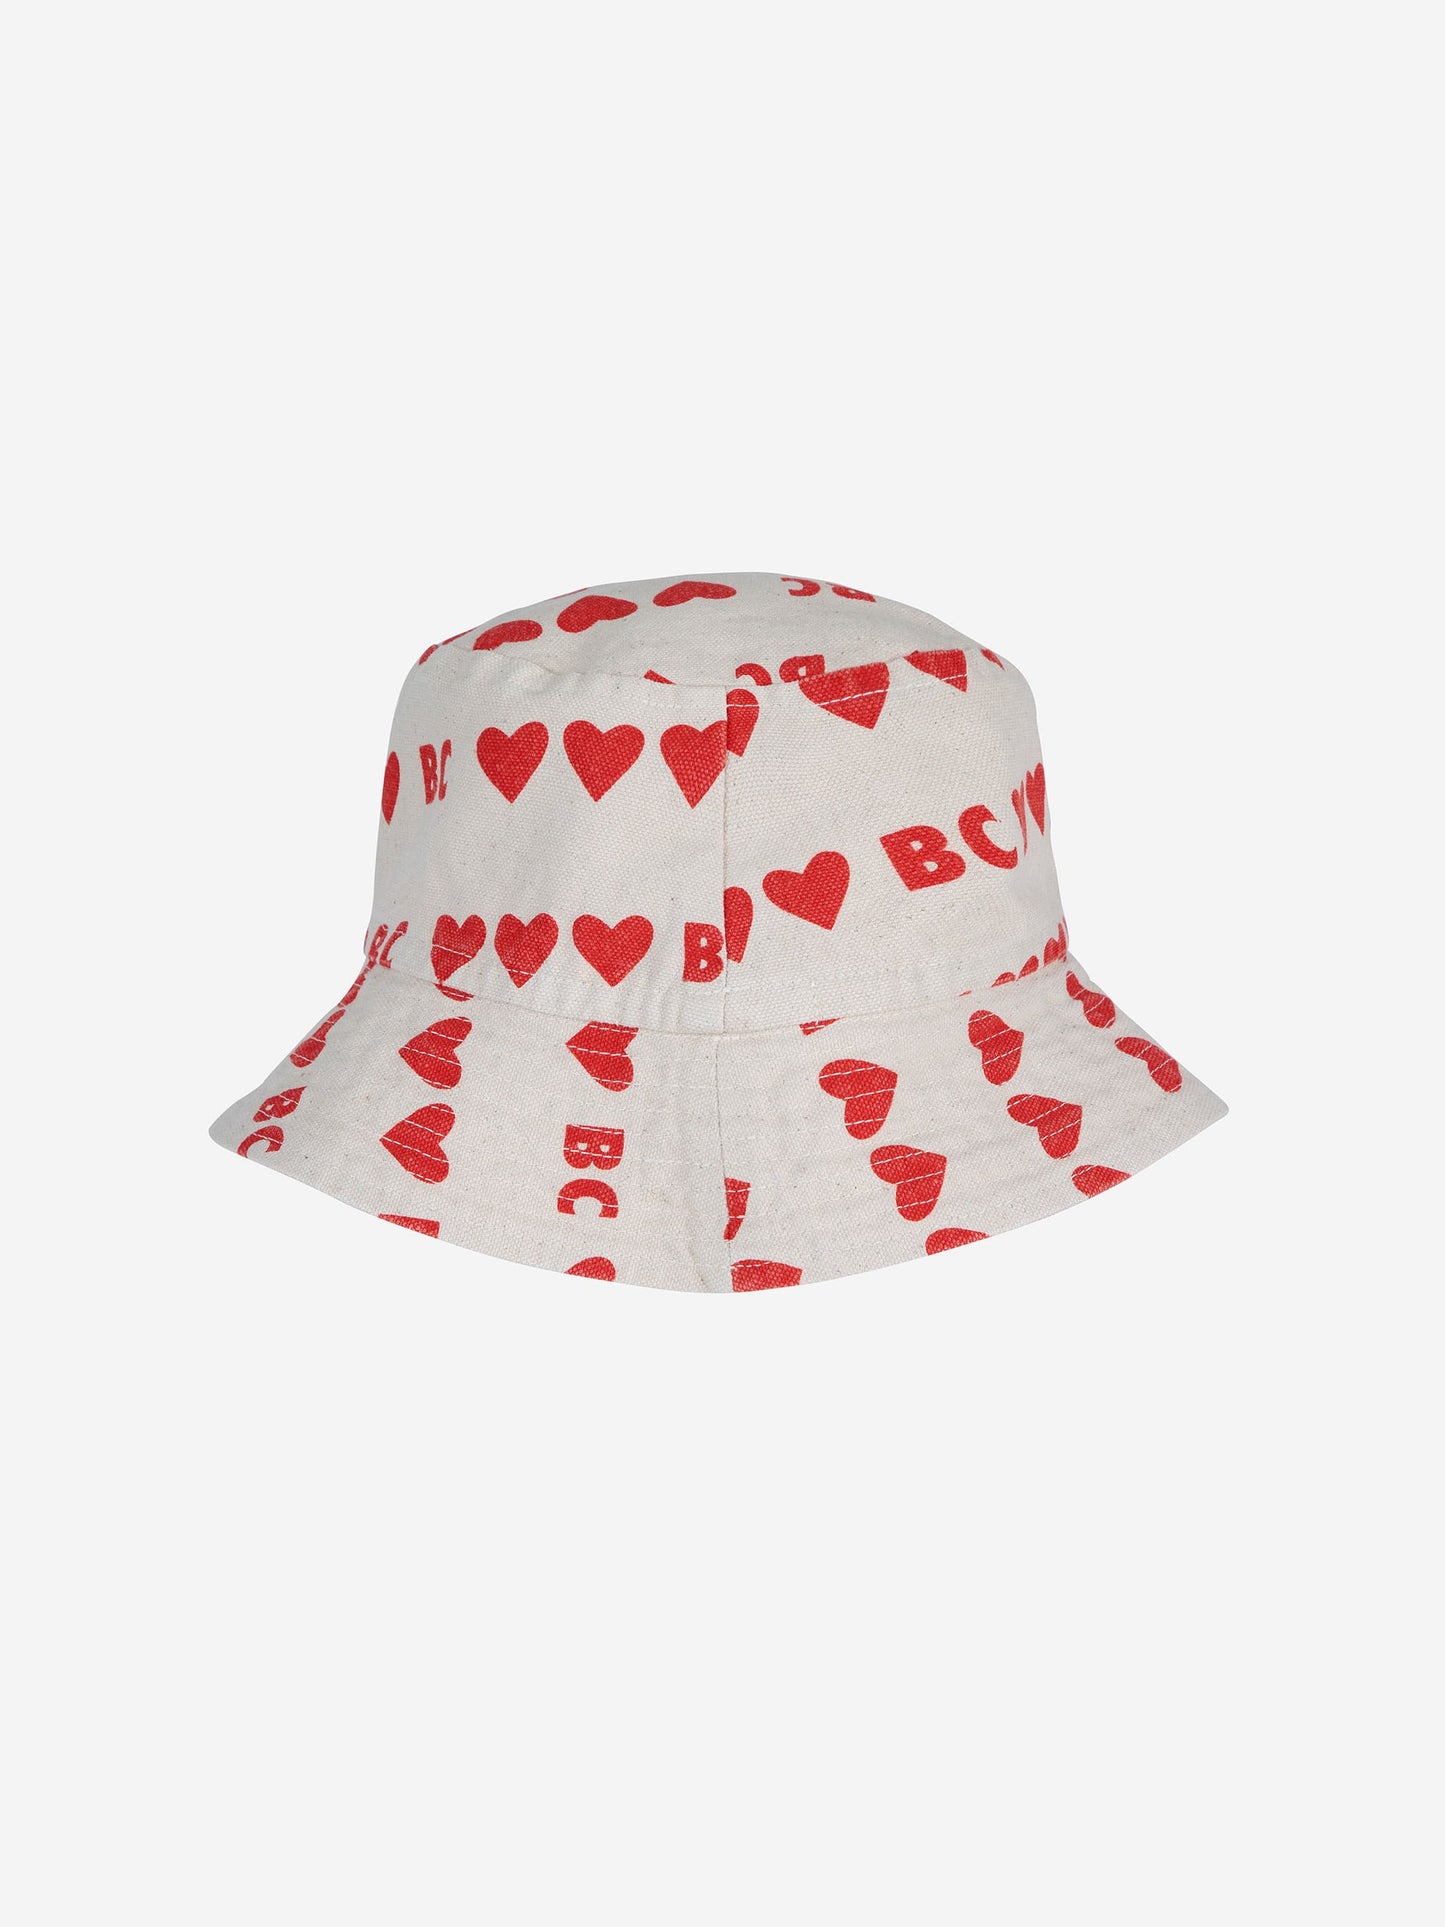 BC hearts all over hat